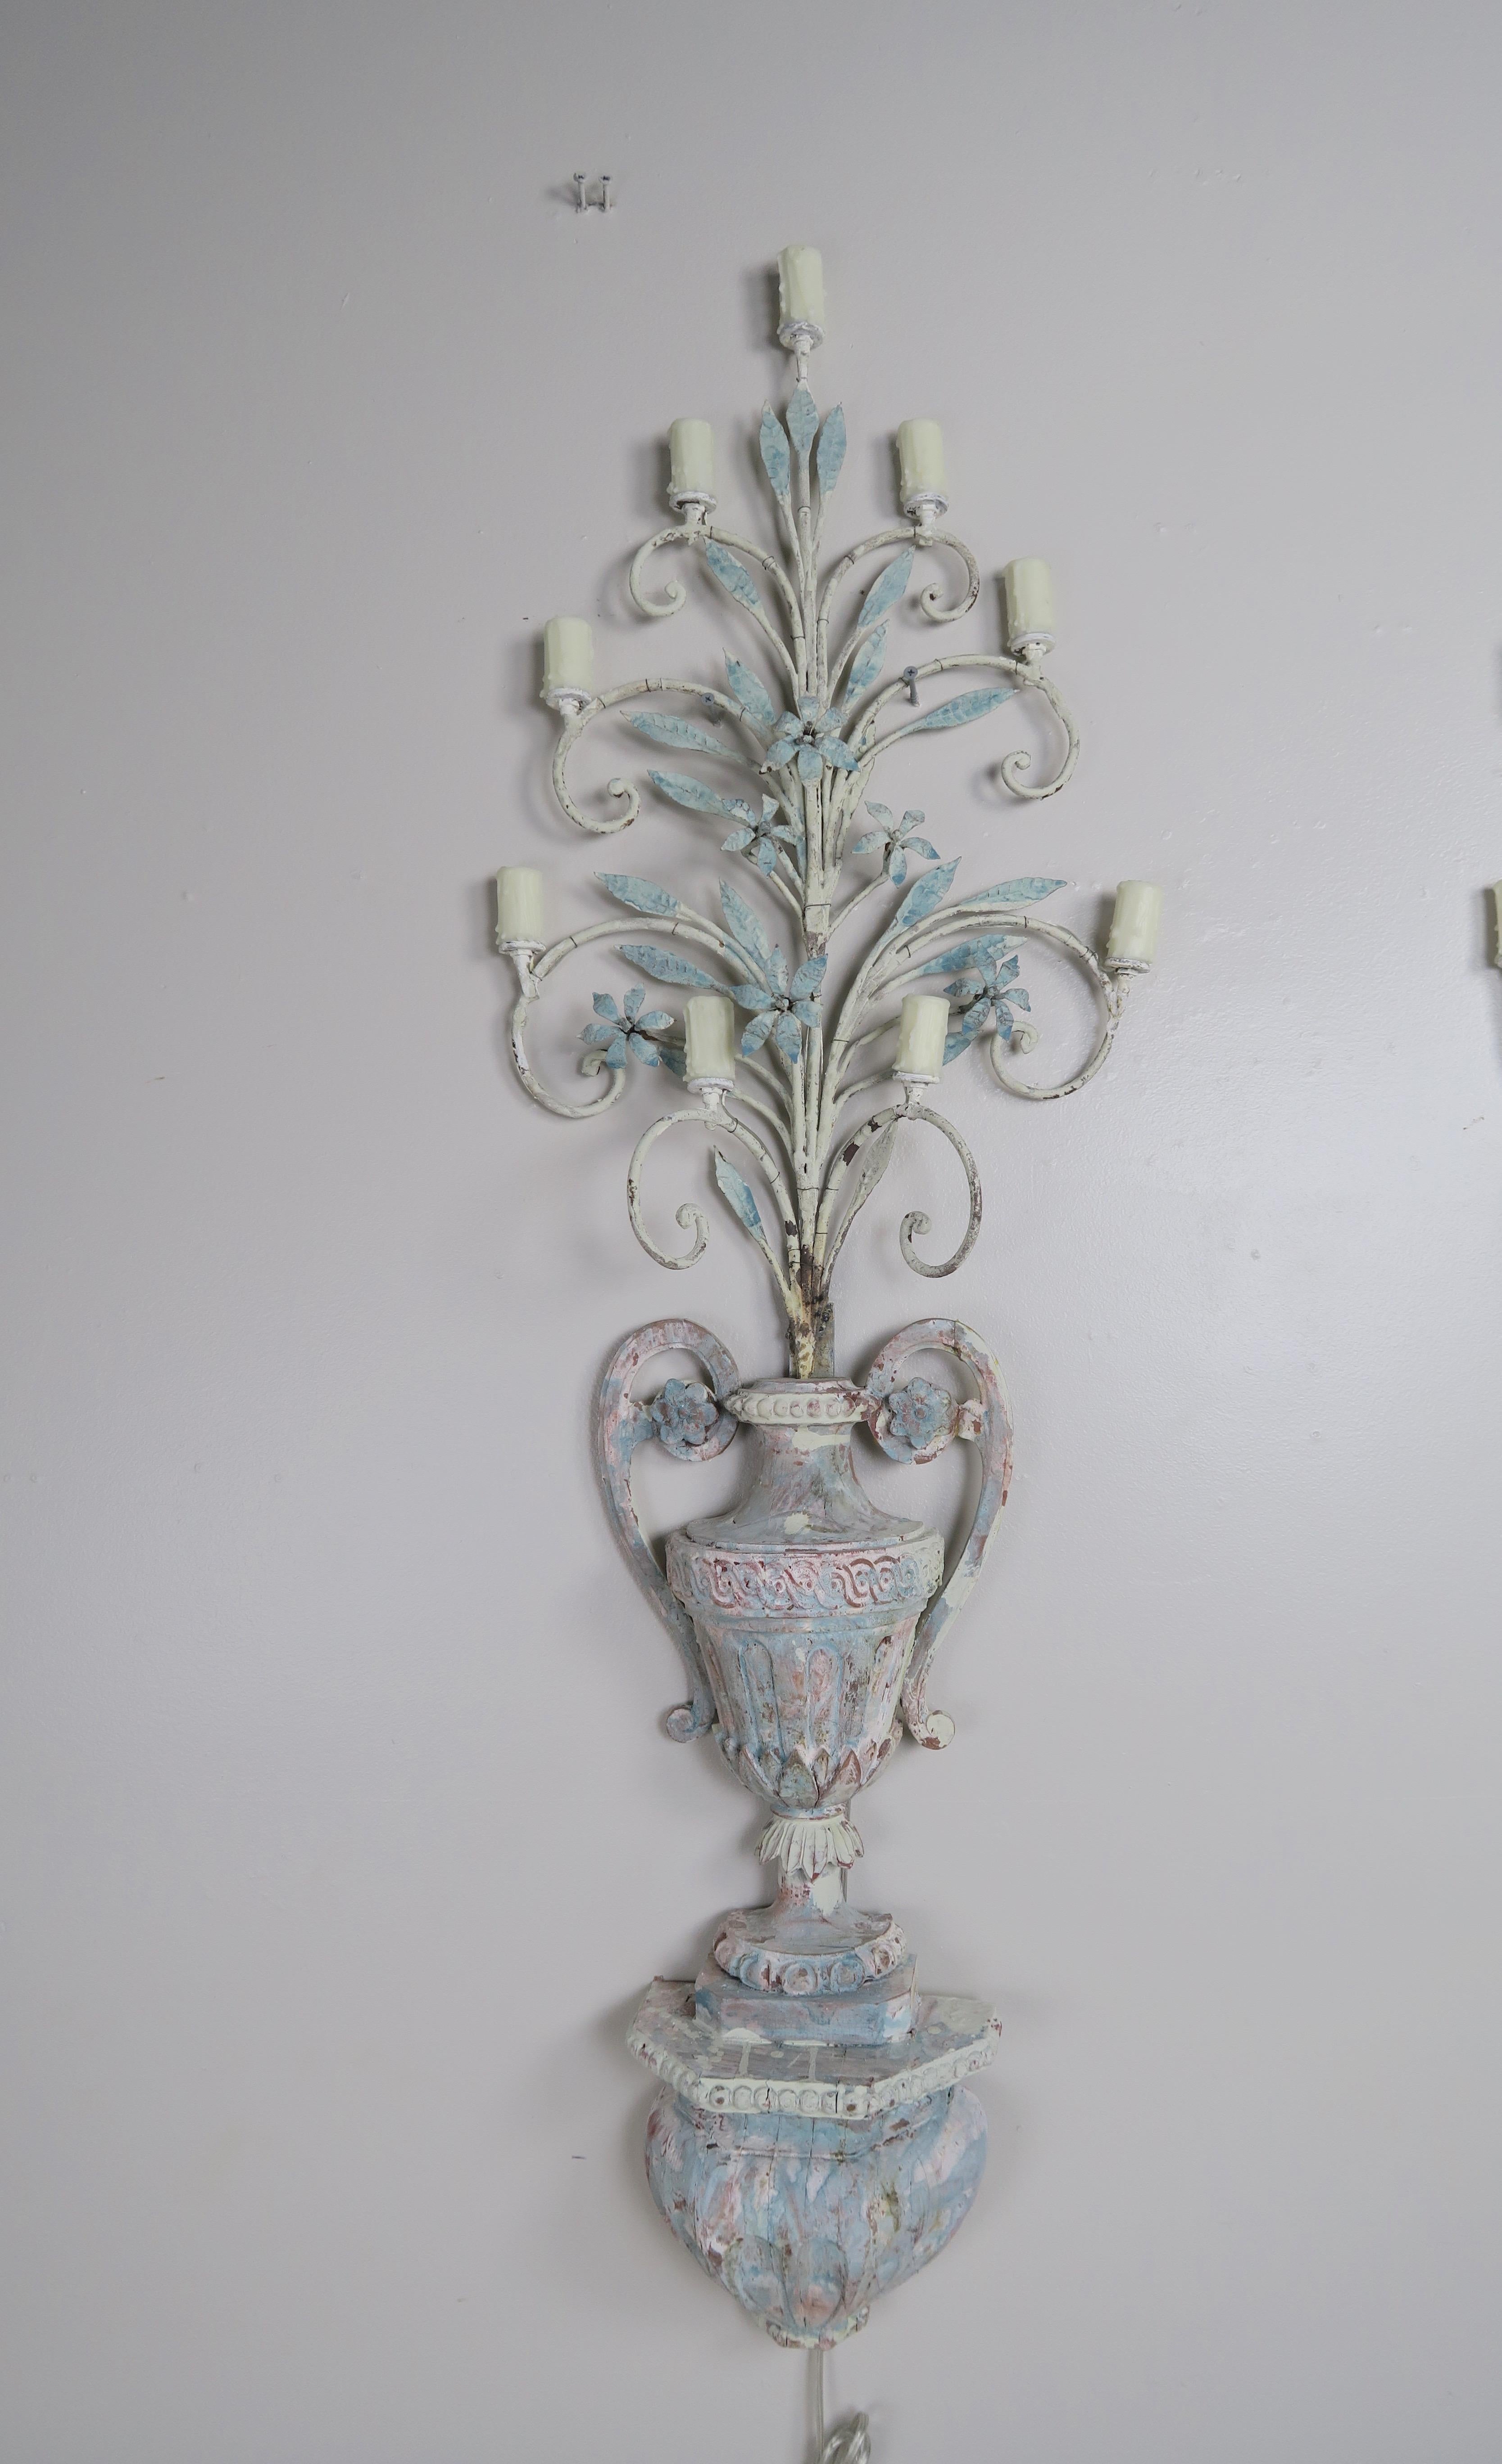 Pair of 19th century Italian painted 9-light sconces. The sconces were originally meant to hold candles. The urns are hand carved and painted in a soft French blue/gray coloration. Wrought iron branches extend from both urns depicting nine lights